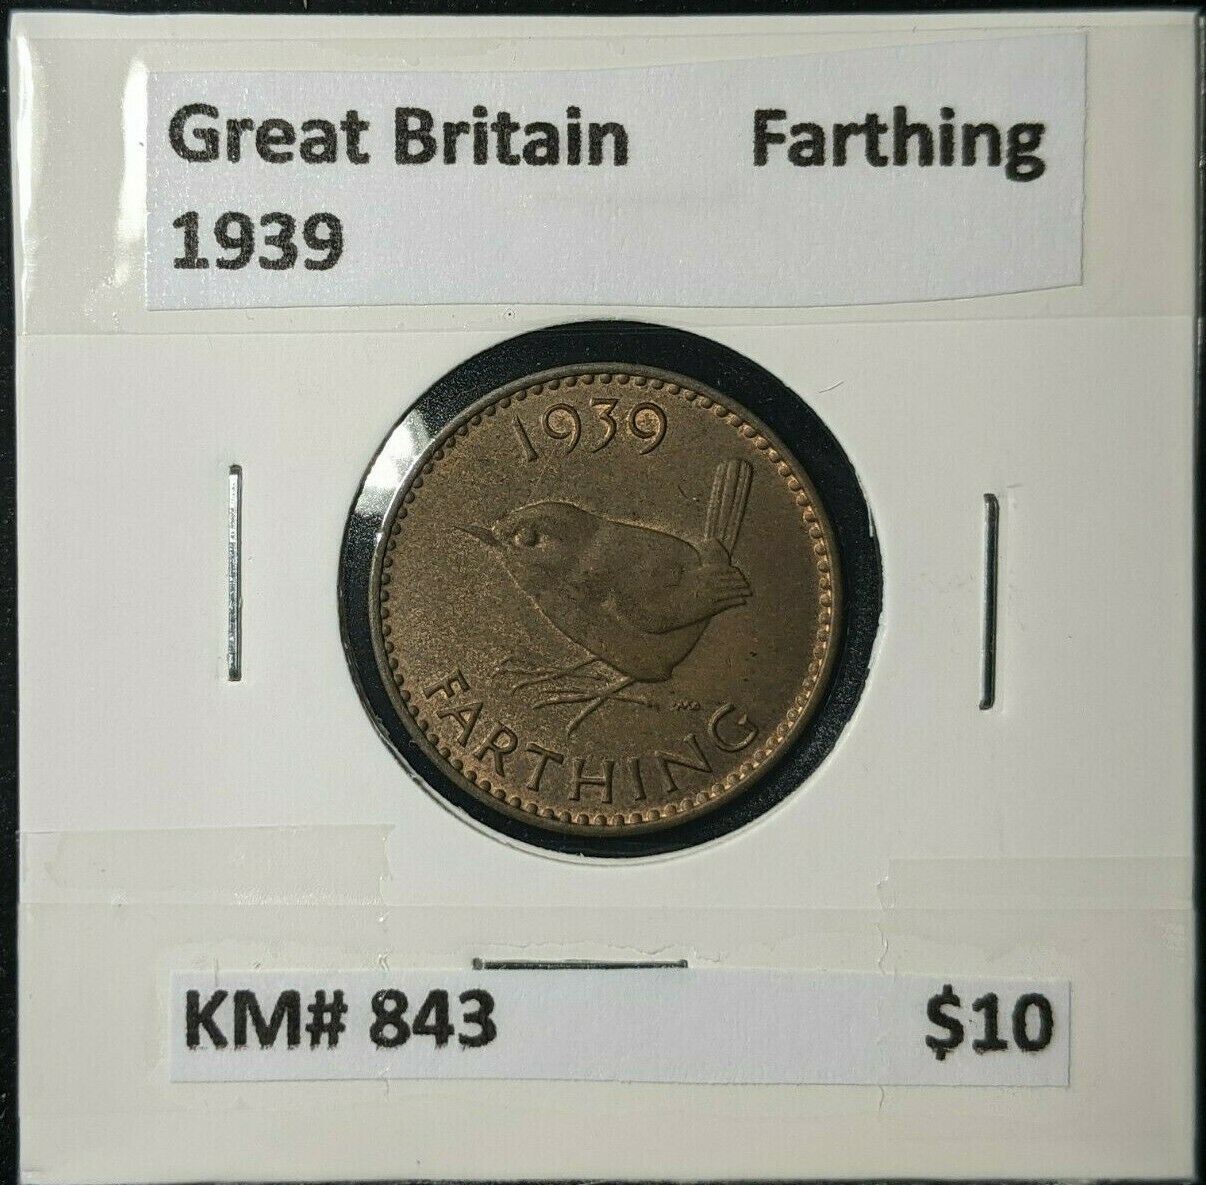 Great Britain 1939 1/4d Farthing KM# 843 #077